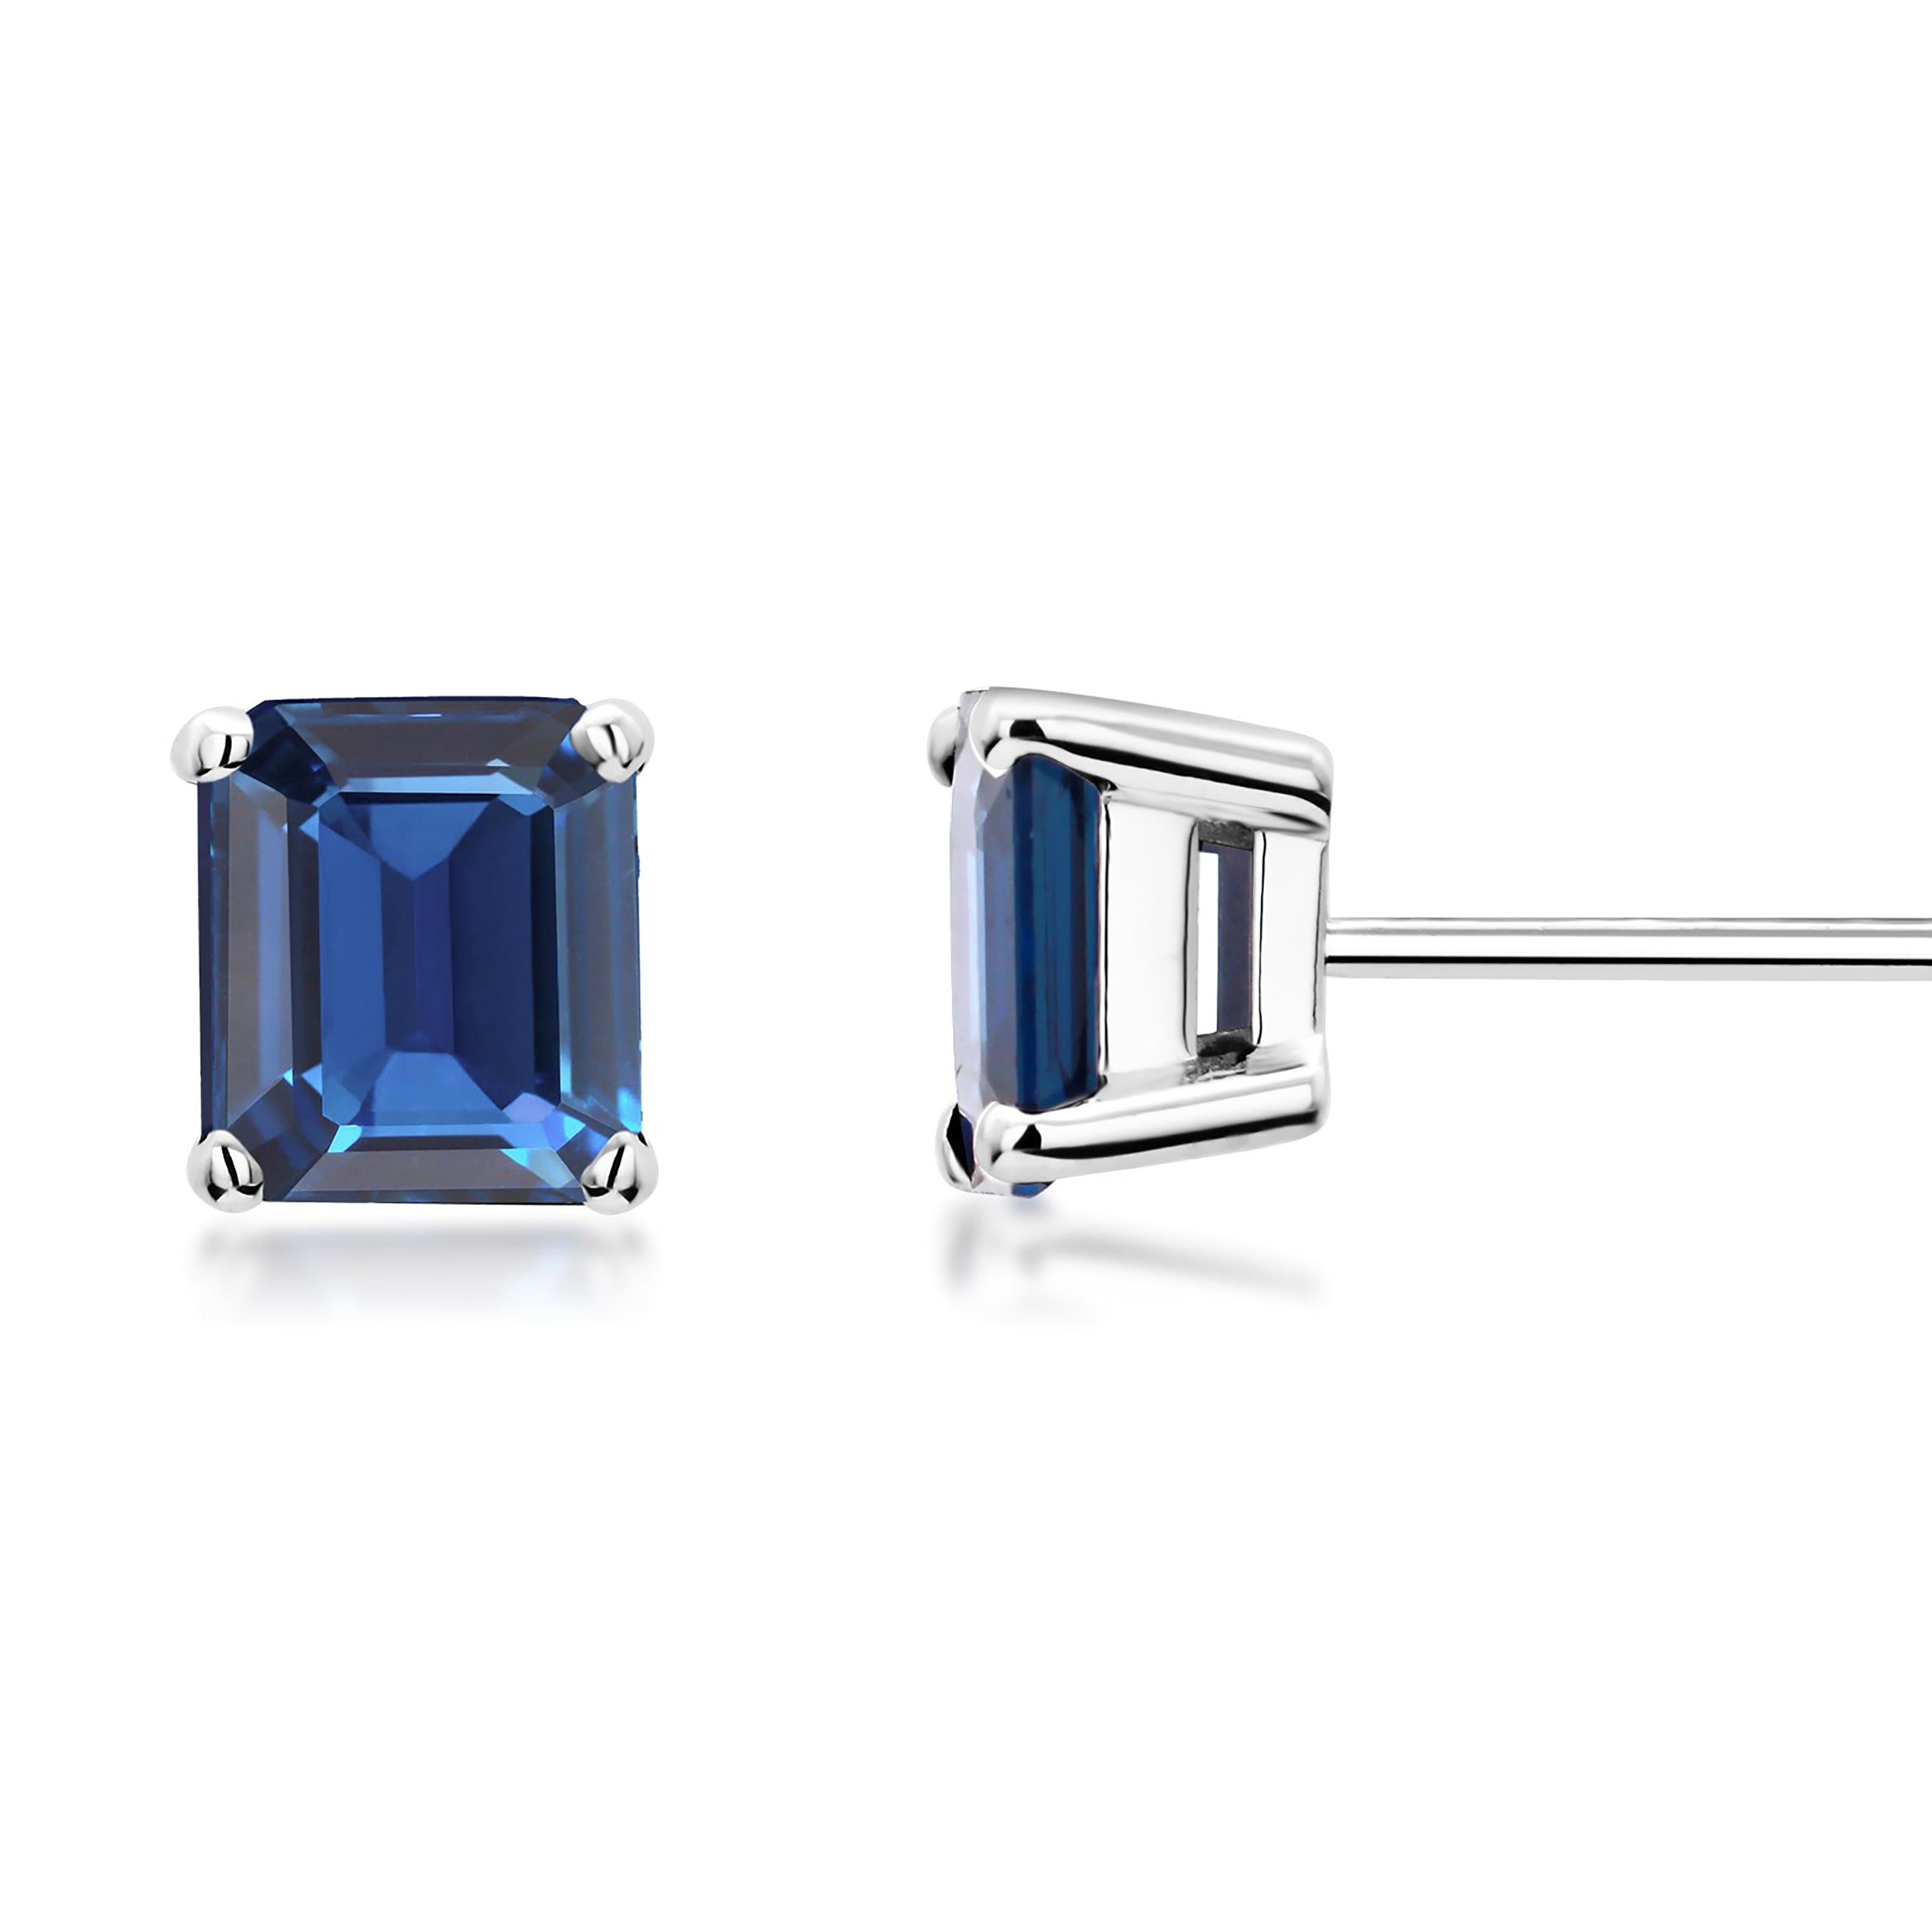 14 karats white gold 6-millimeter sapphire stud earrings 
Emerald-Cut sapphires weighing 1.61 carats
Width of the earrings 6.5 millimeter 
New Earrings
Handmade in the USA
The 14 karat gold earrings are hanging off a post with push-backs
Our design